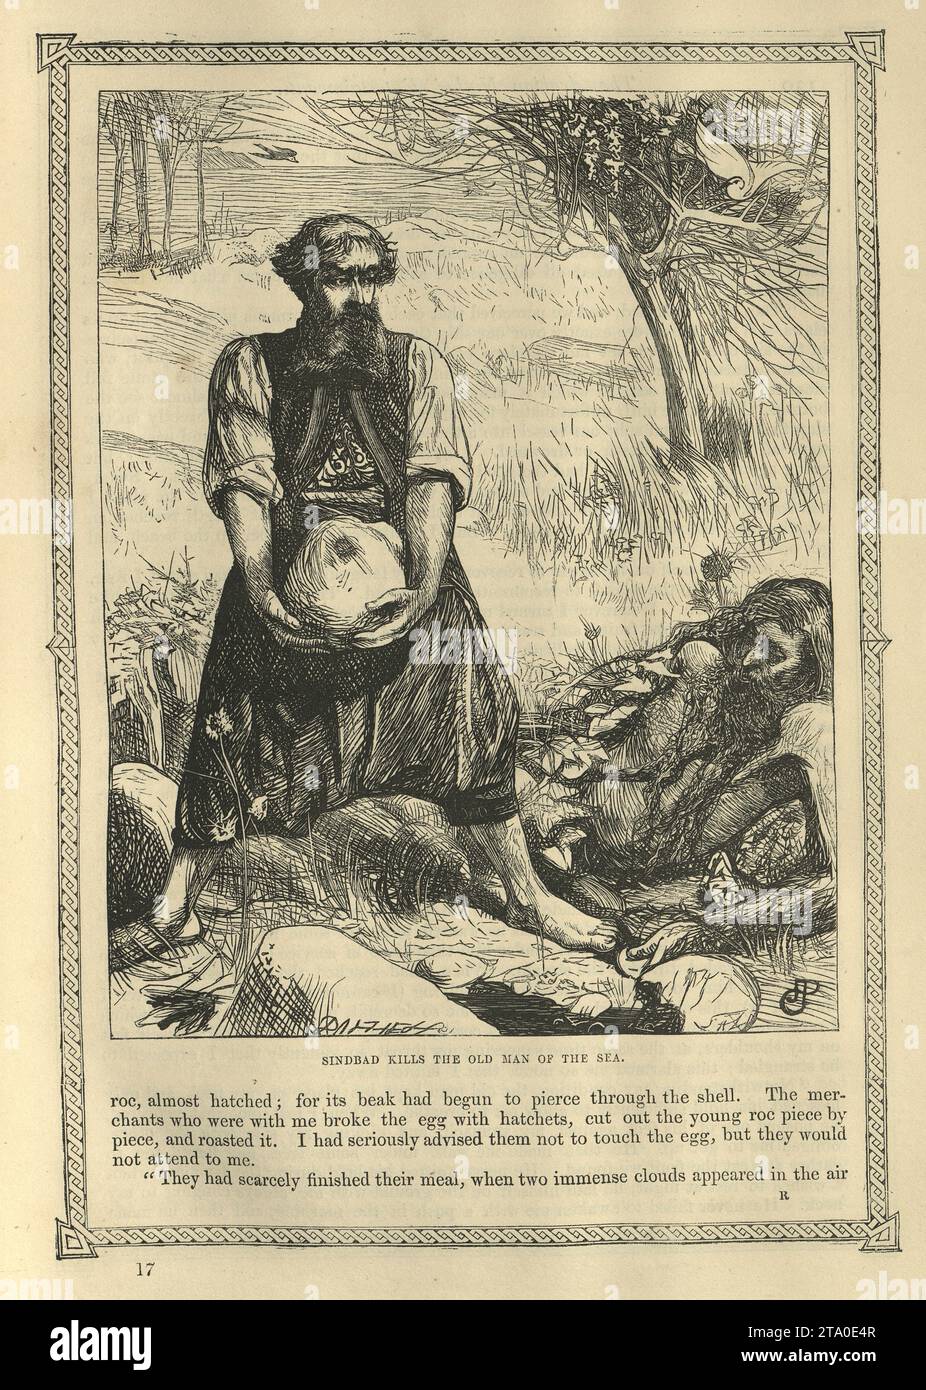 Vintage illustration One Thousand and One Nights, Sinbad the Sailor kills the old man of the sea, Arabian, Middle Eastern folktales, by The Brothers Dalziel. Stock Photo